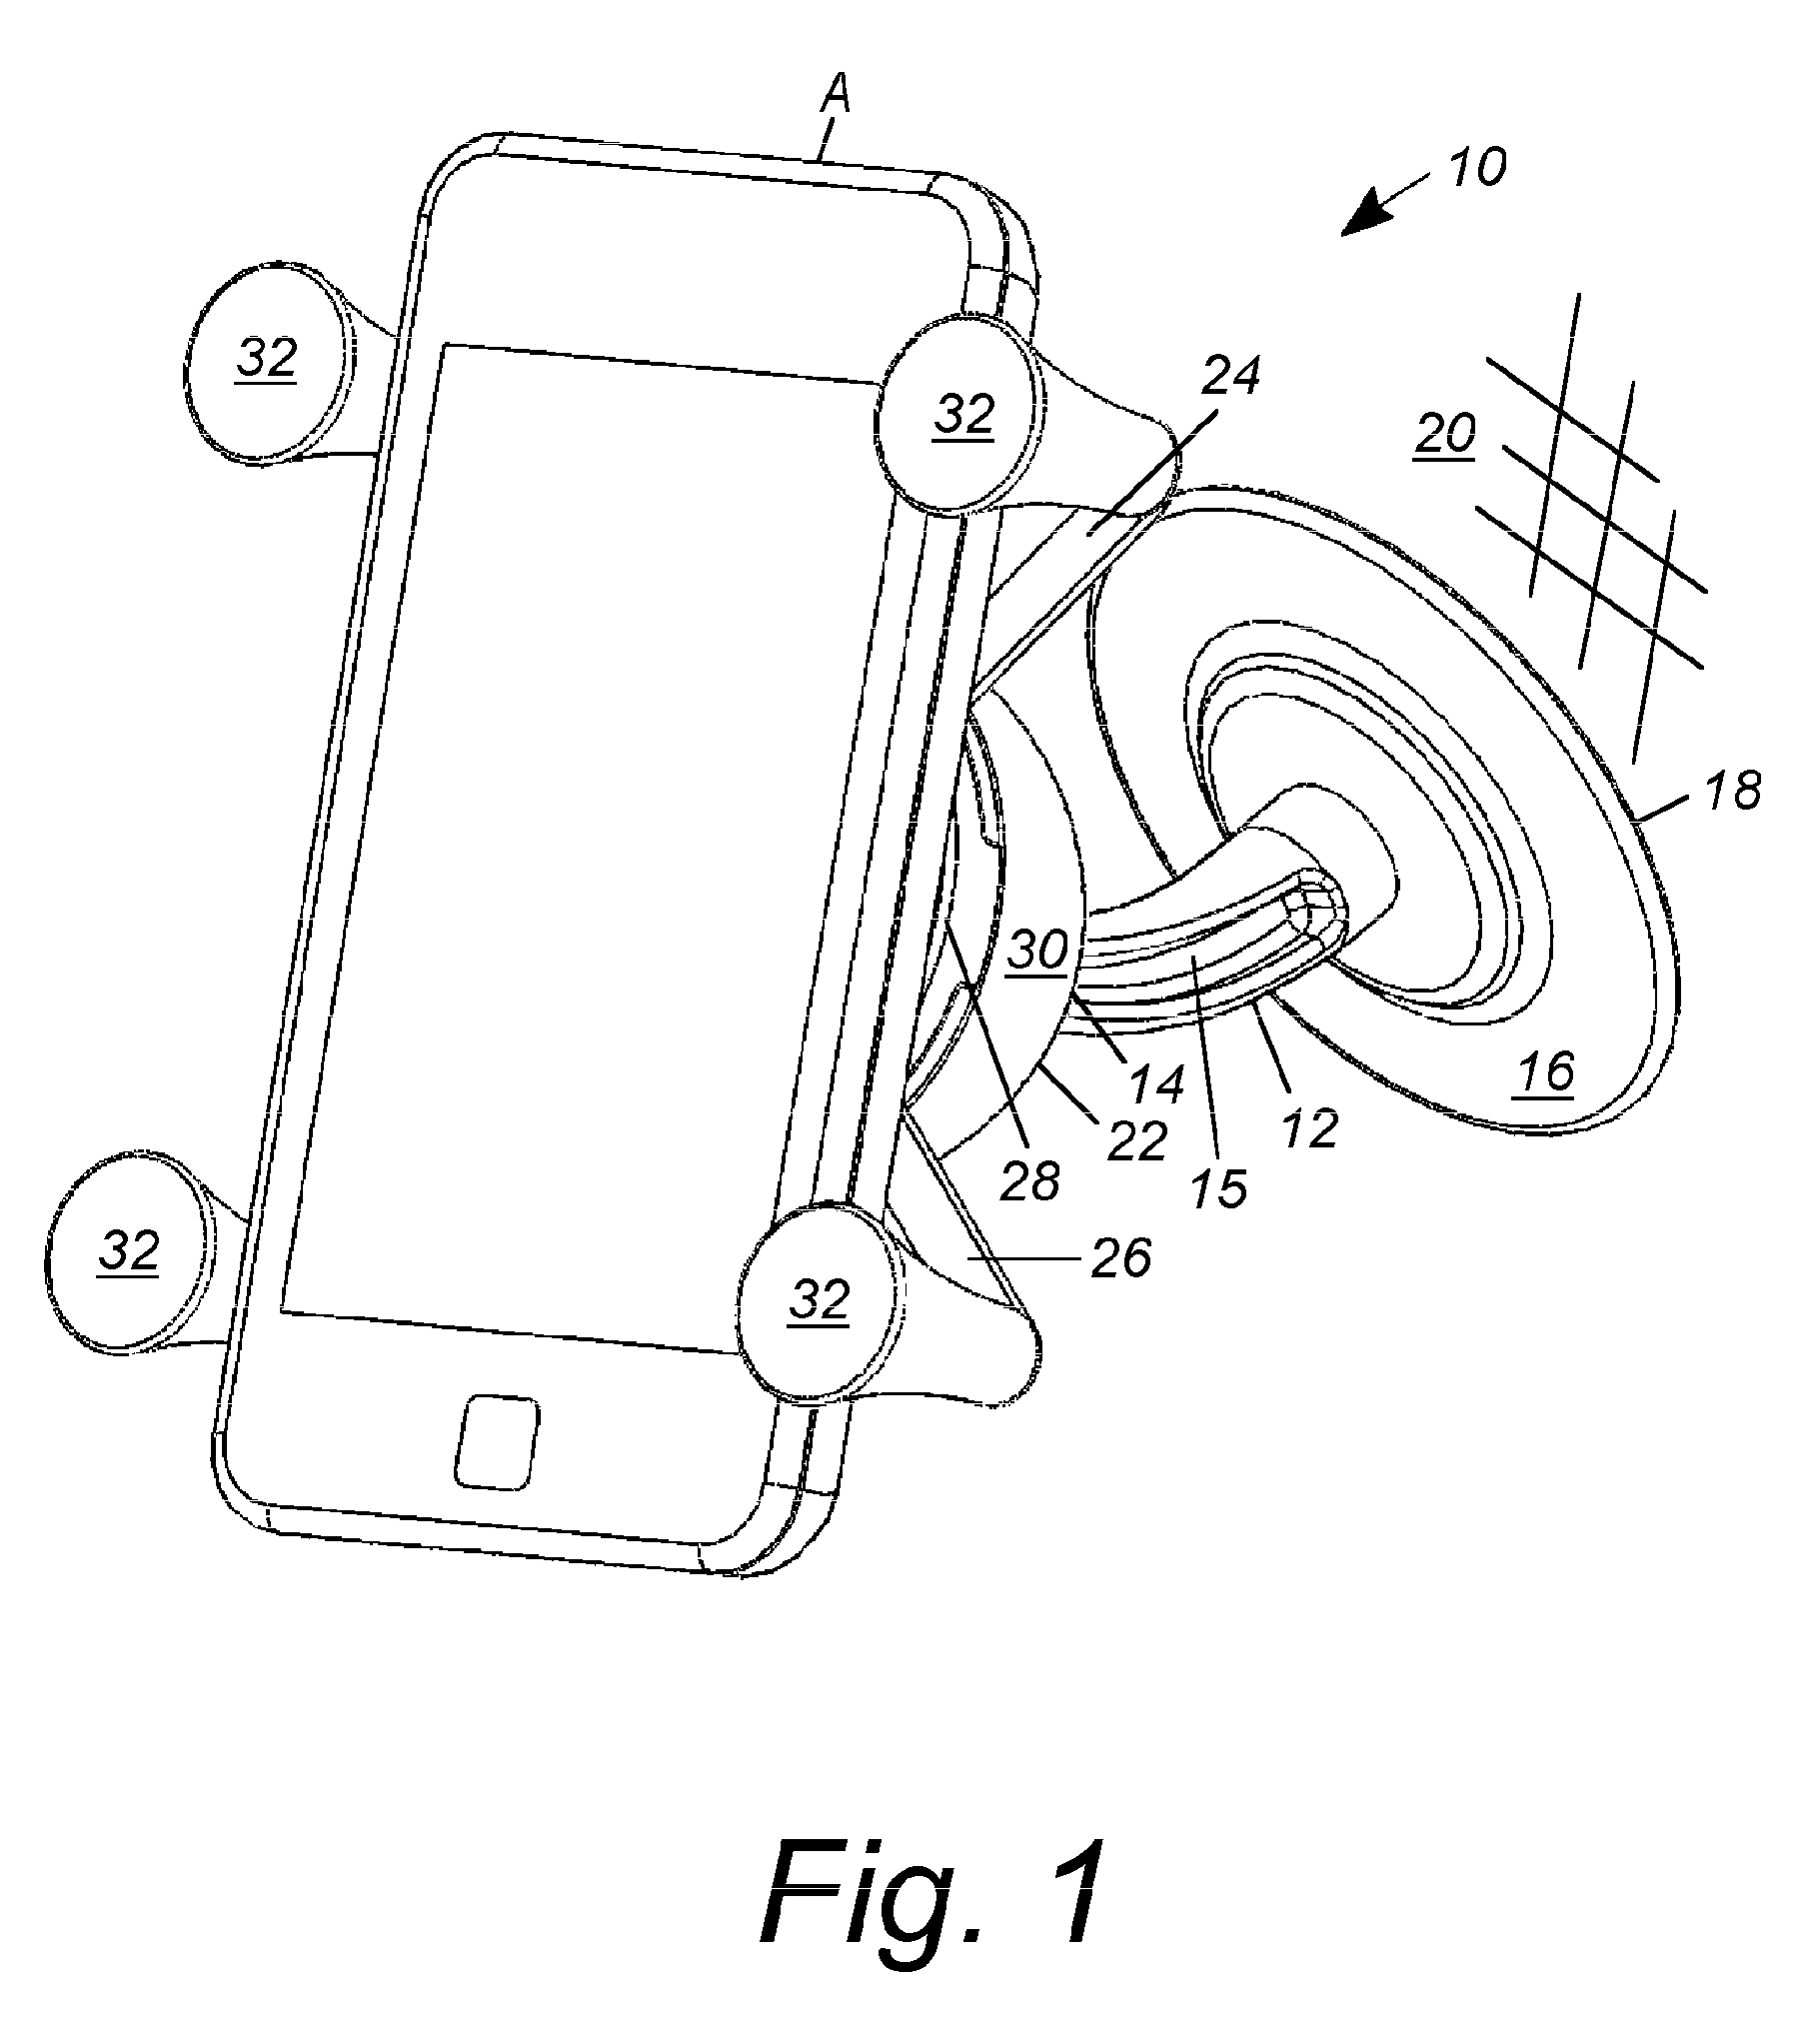 Method for mounting a portable device